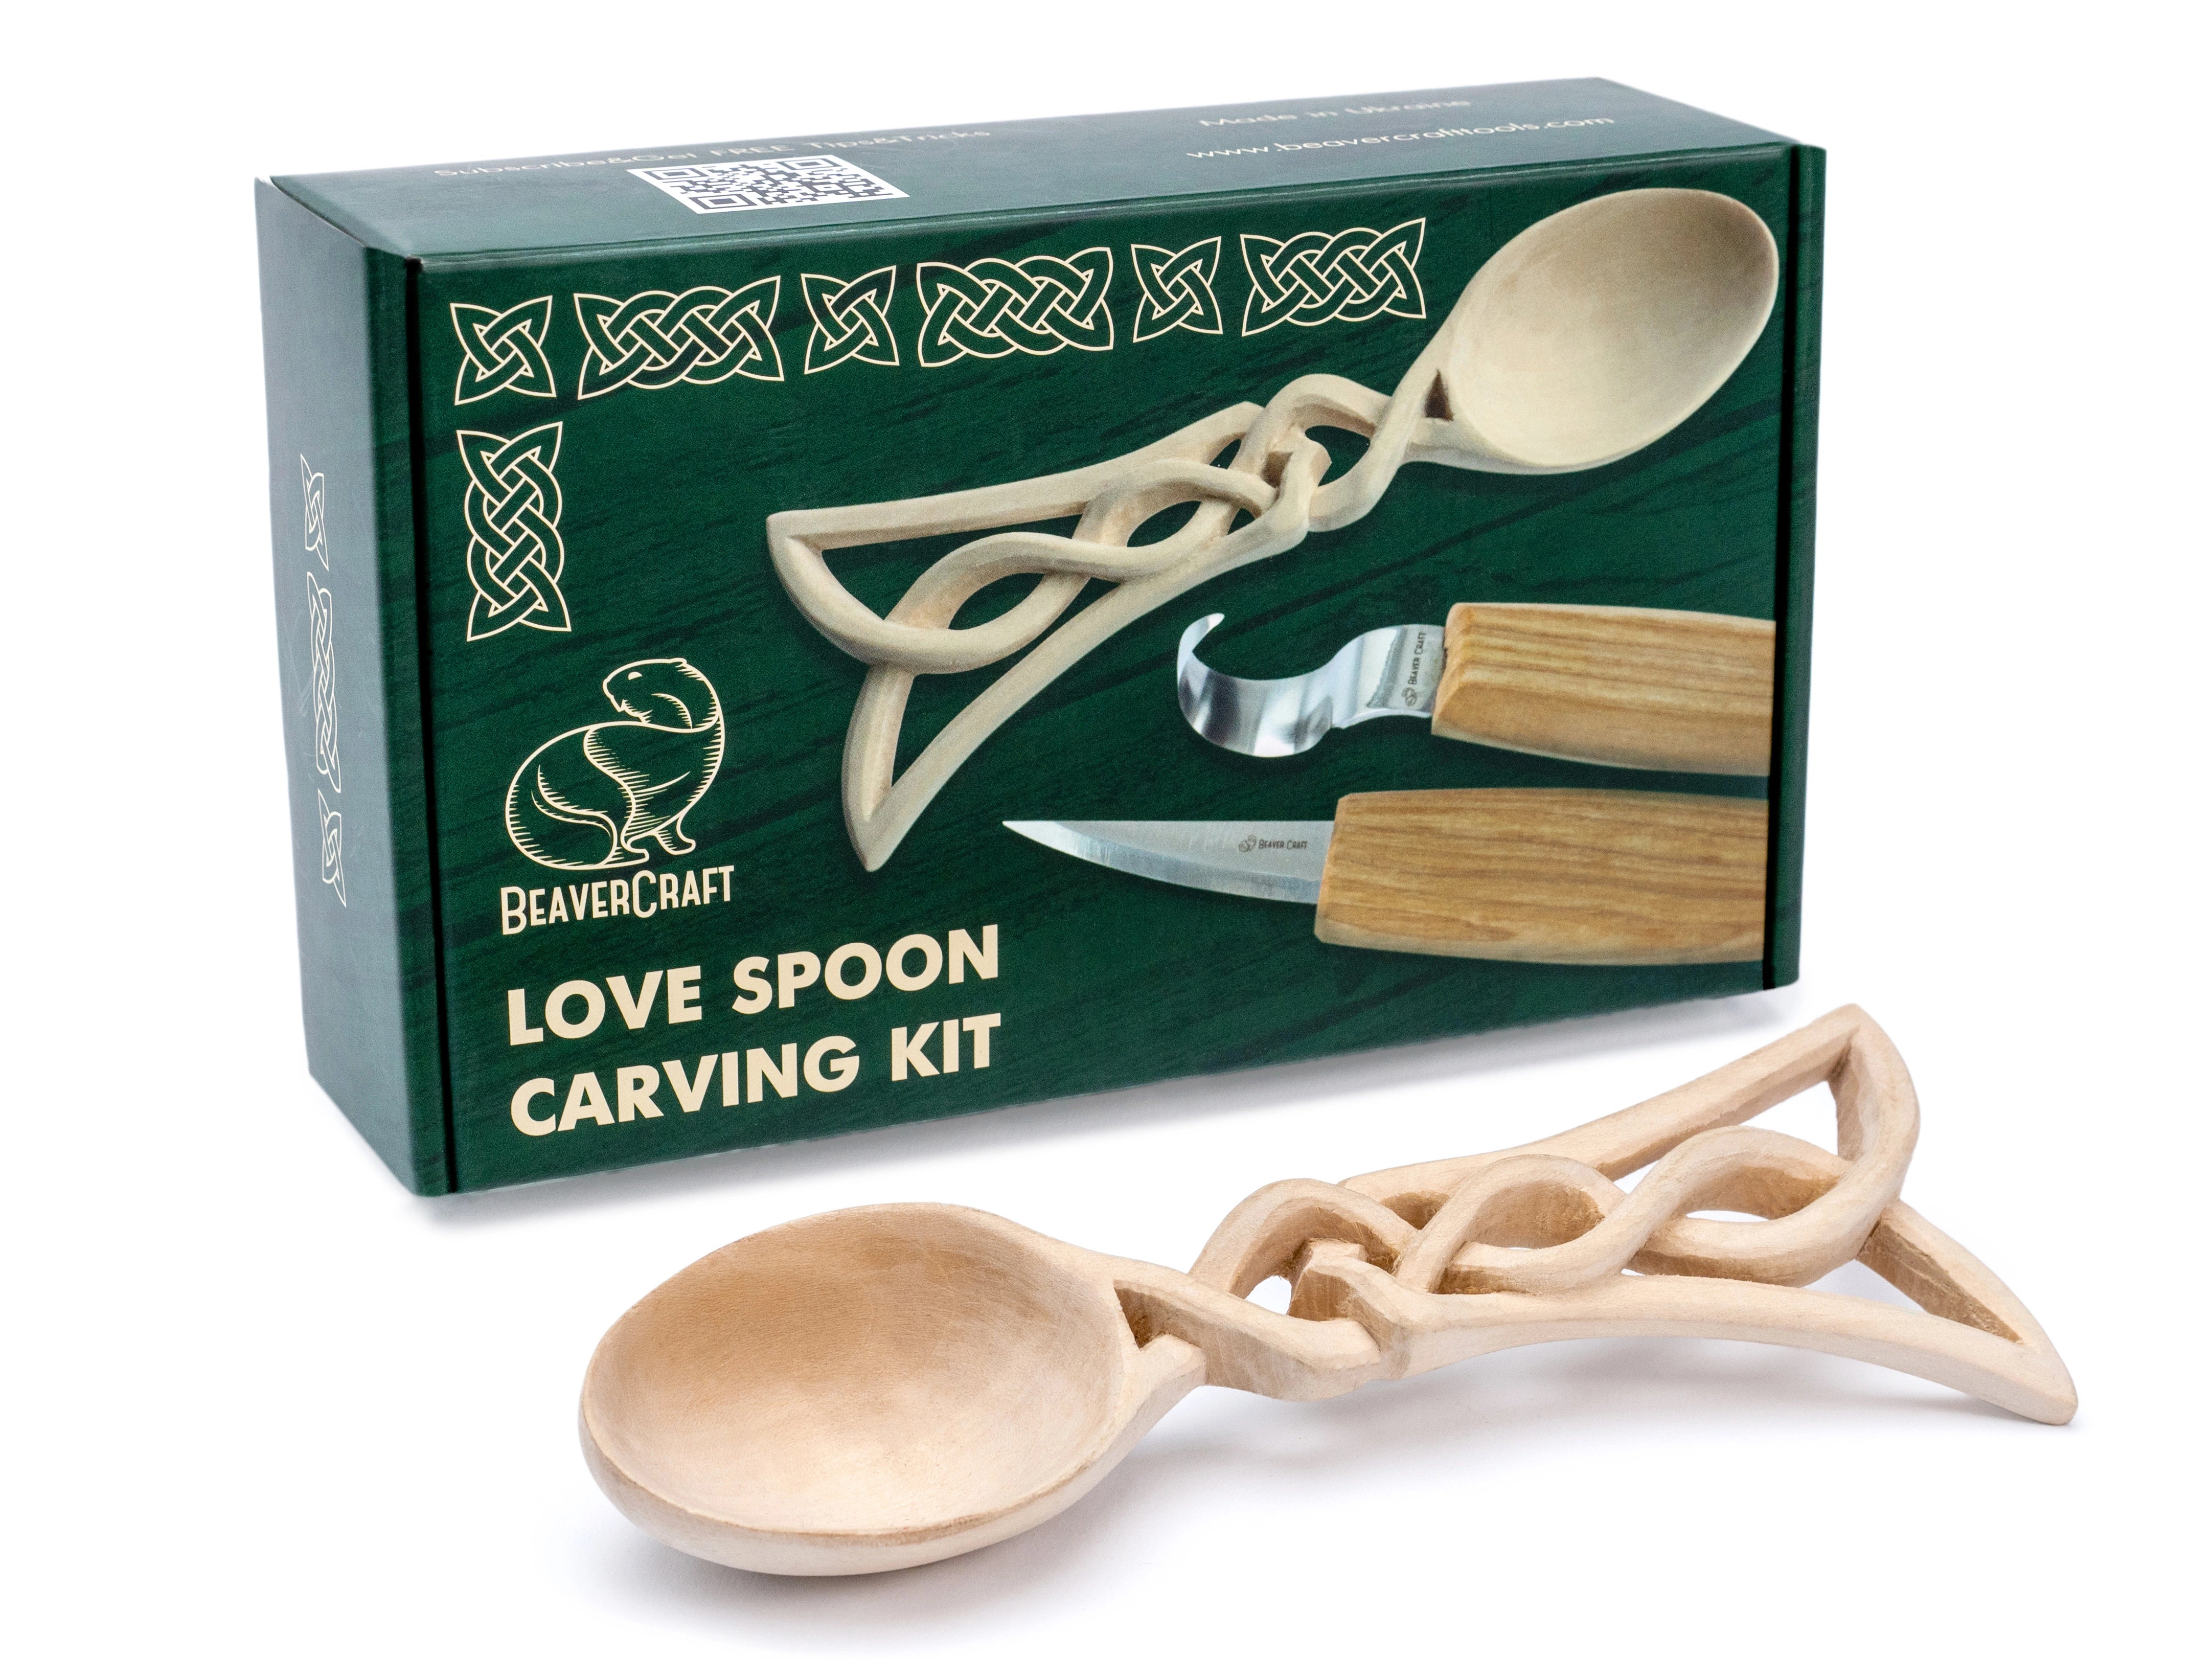 DIY04 - Celtic Spoon Carving Kit - Complete Starter Whittling Kit for Beginners Adults Teens and Kids